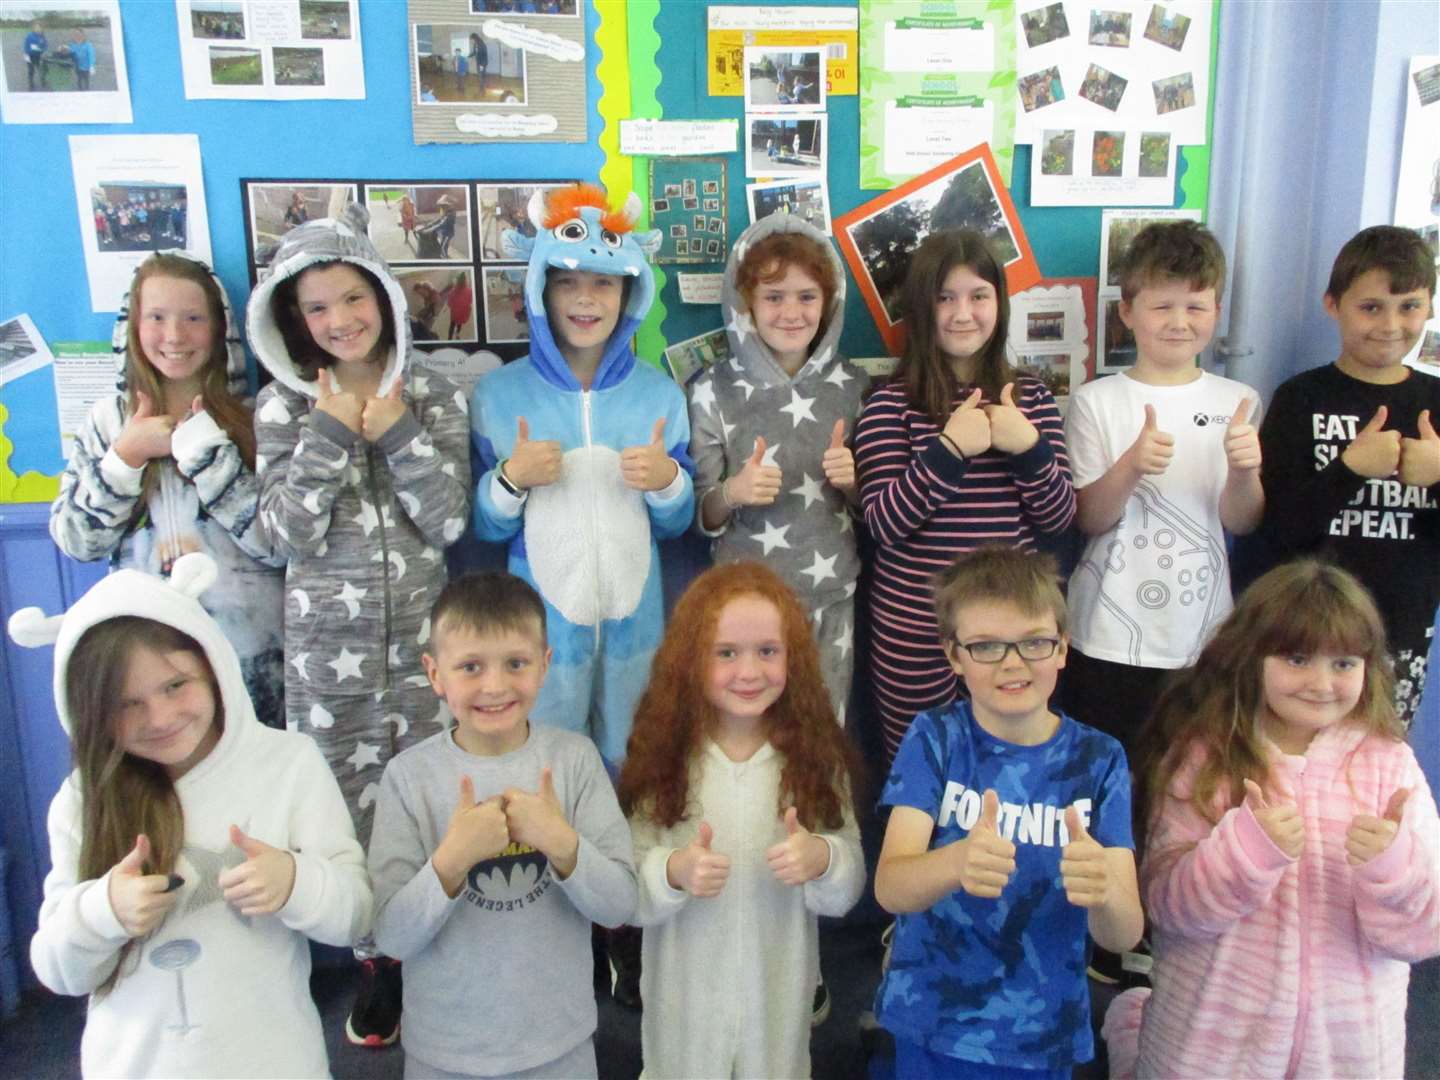 Some of the P5 children give a thumbs-up to wearing their pyjamas and onesies to school.